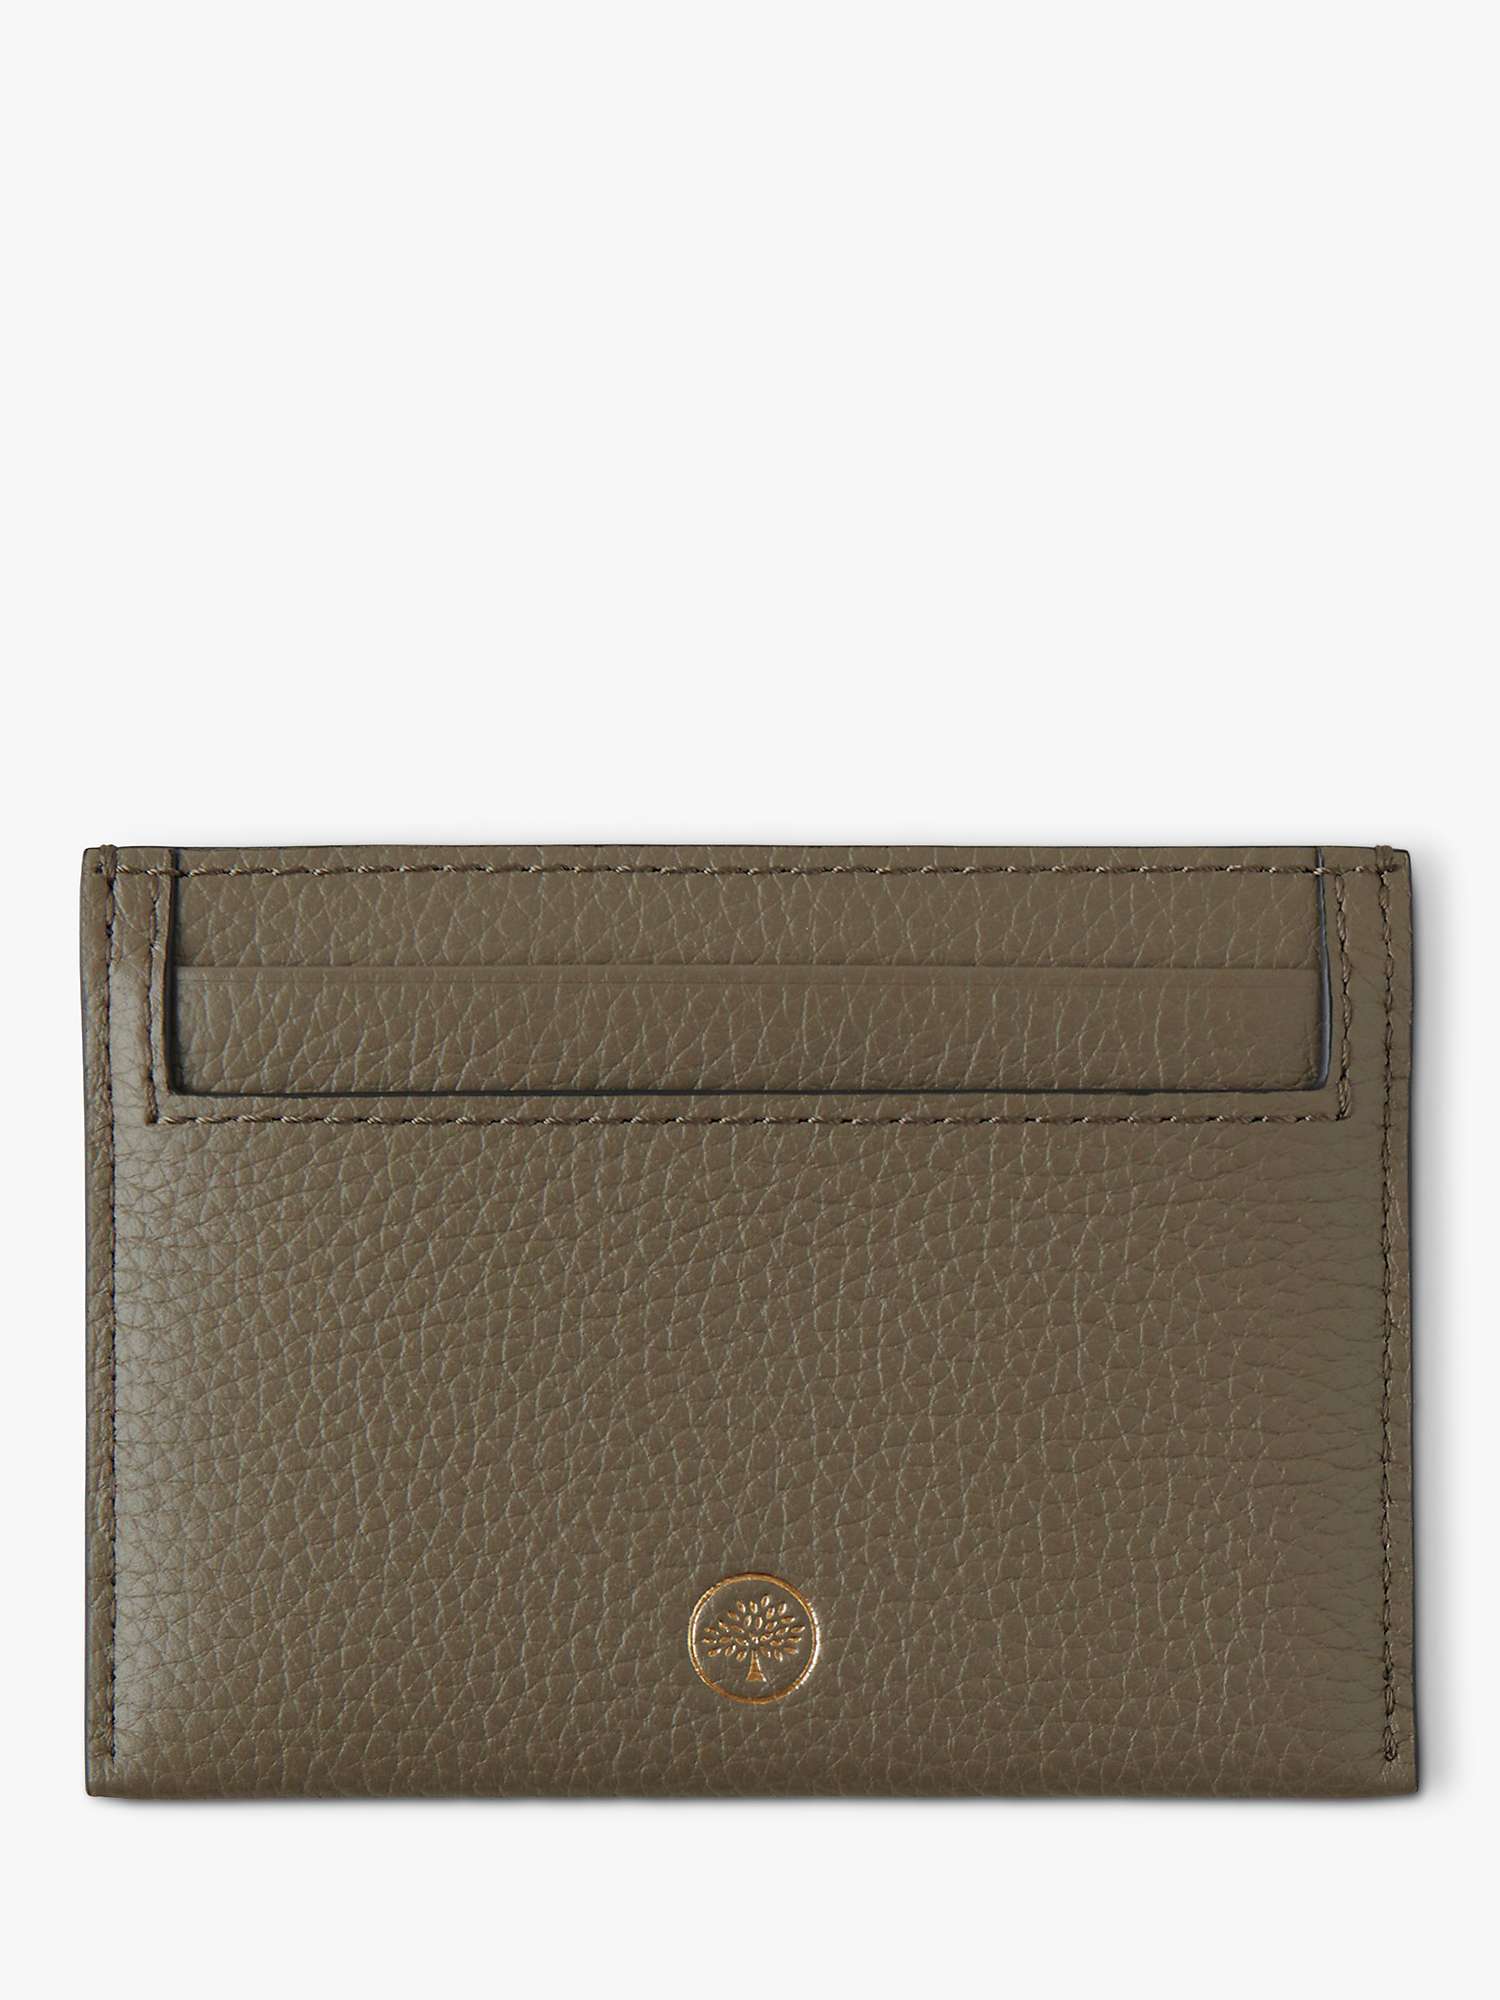 Buy Mulberry Continental Small Classic Grain Leather Credit Card Slip Online at johnlewis.com